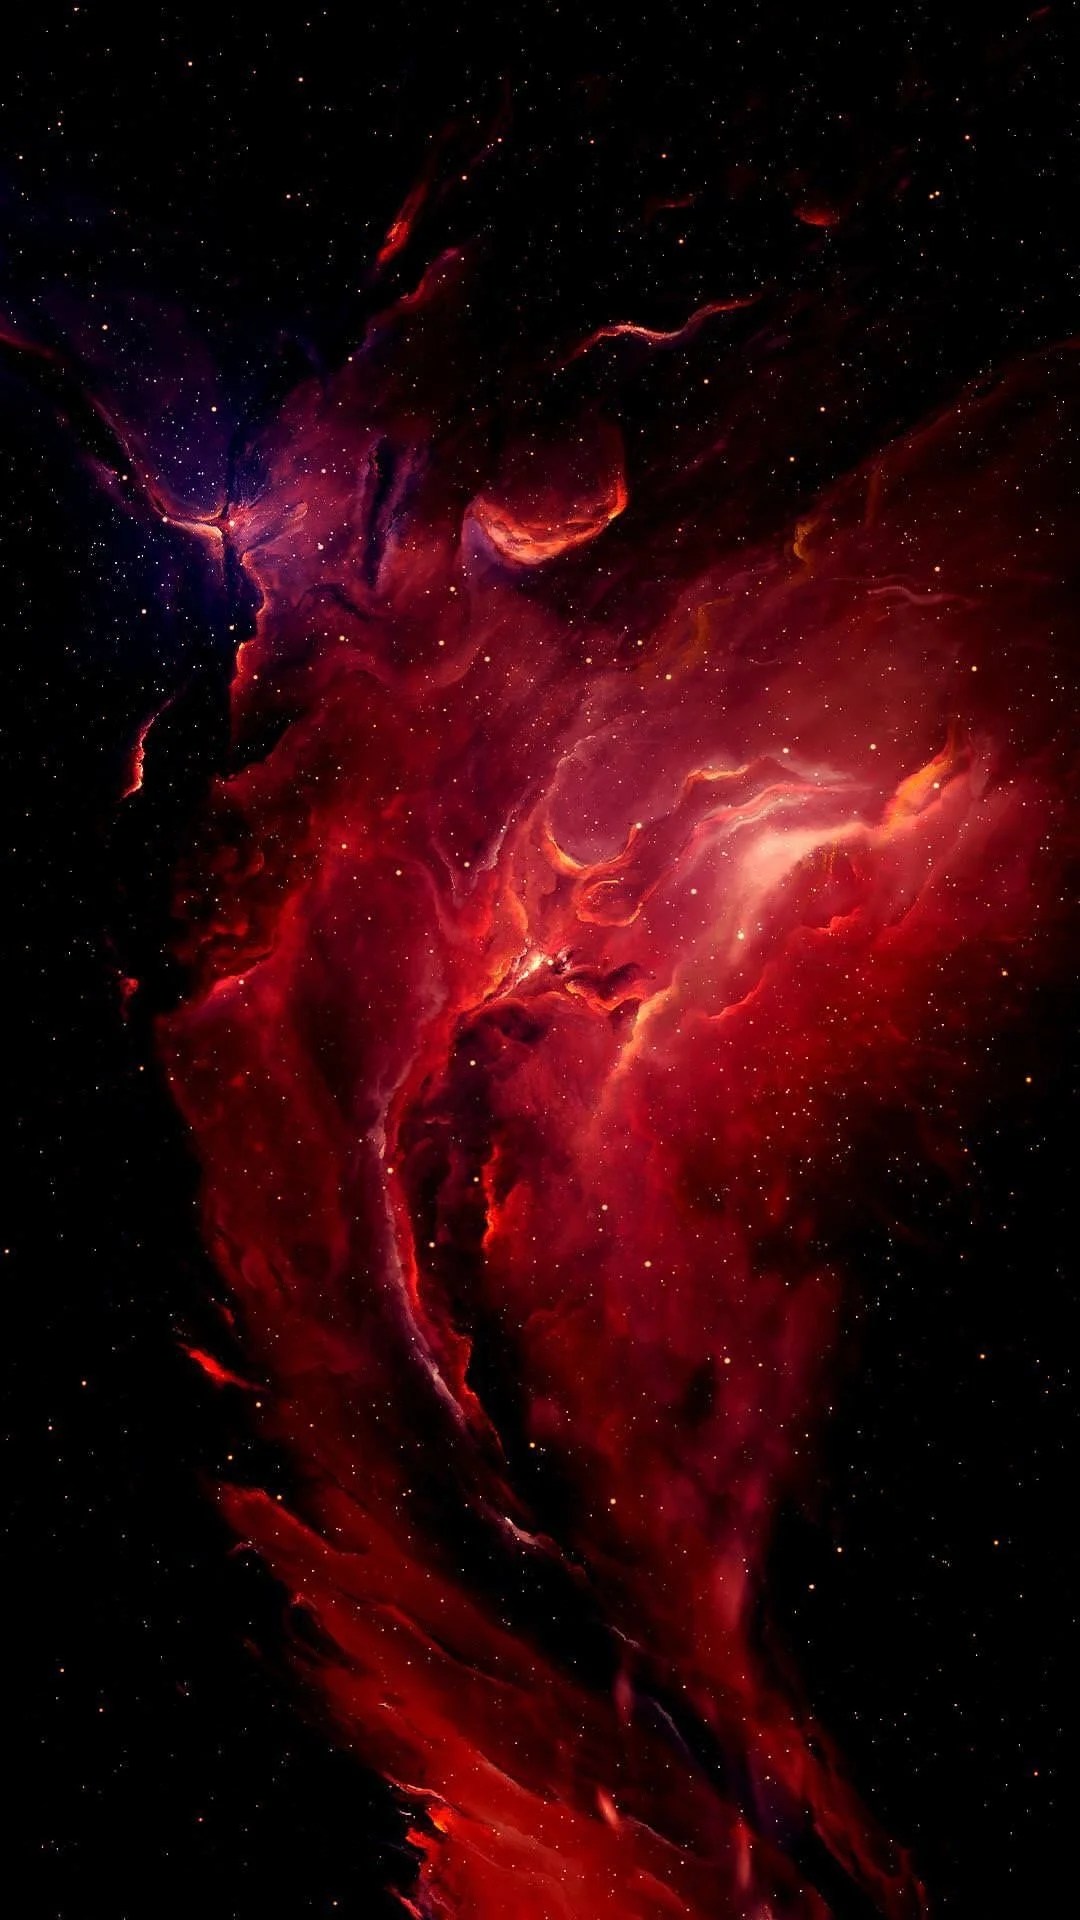 Best Oled Wallpaper For iPhone X